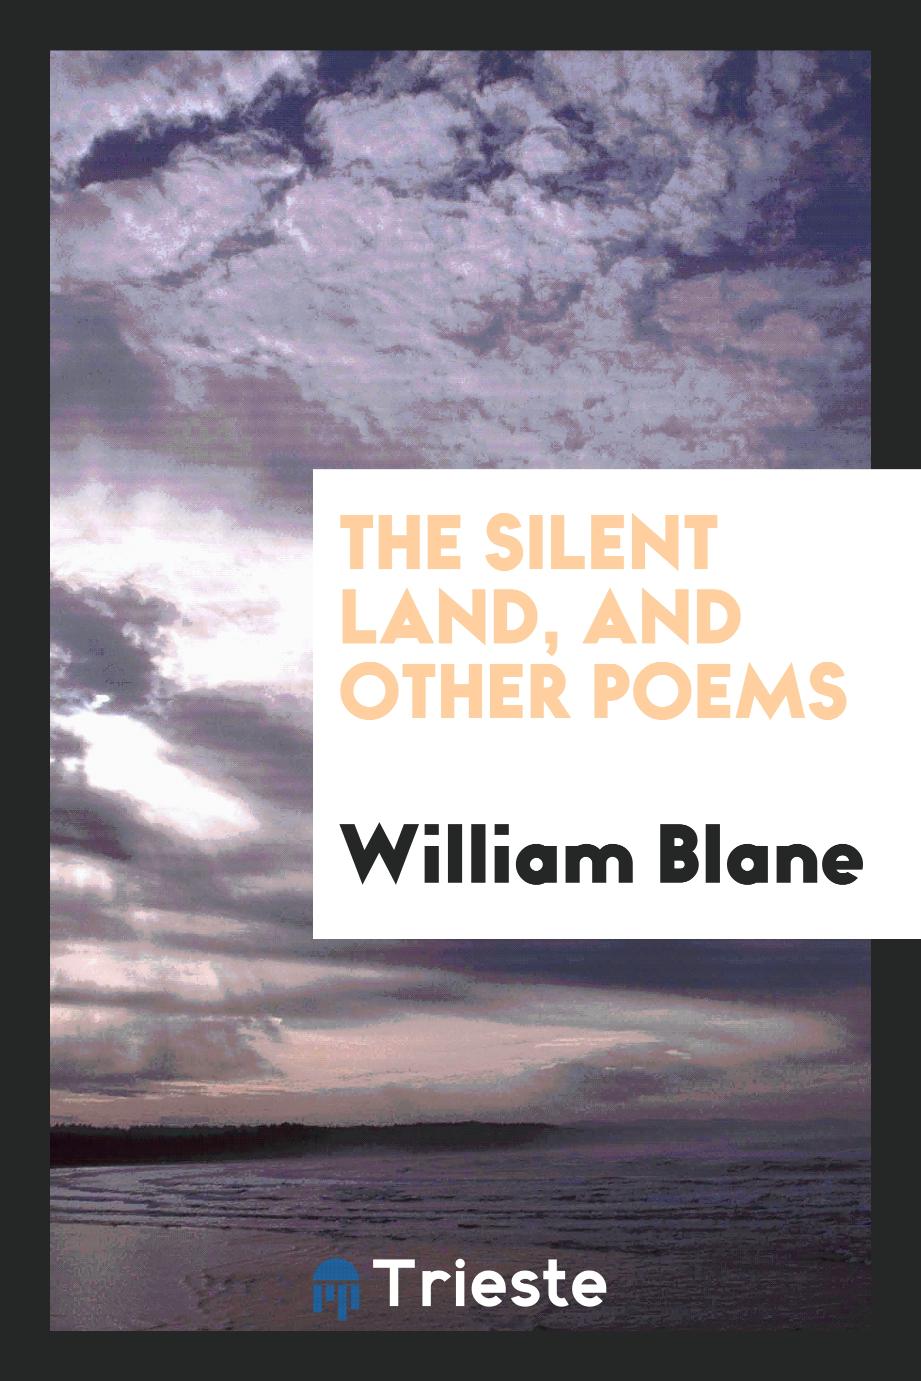 The silent land, and other poems